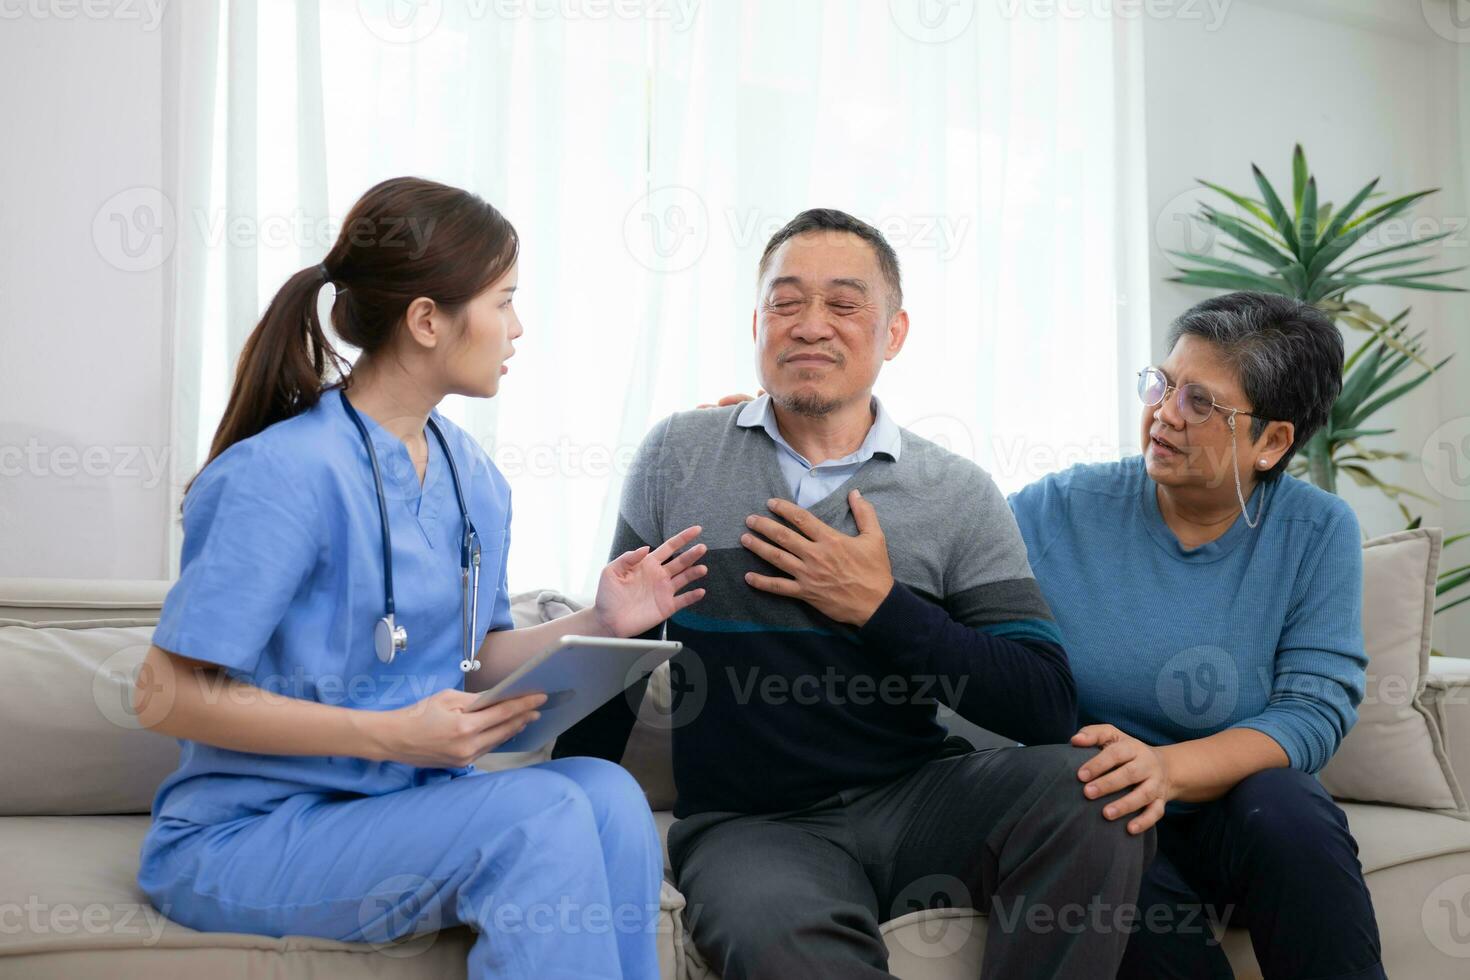 Asian senior patient talking with doctor and nurse on sofa at home photo